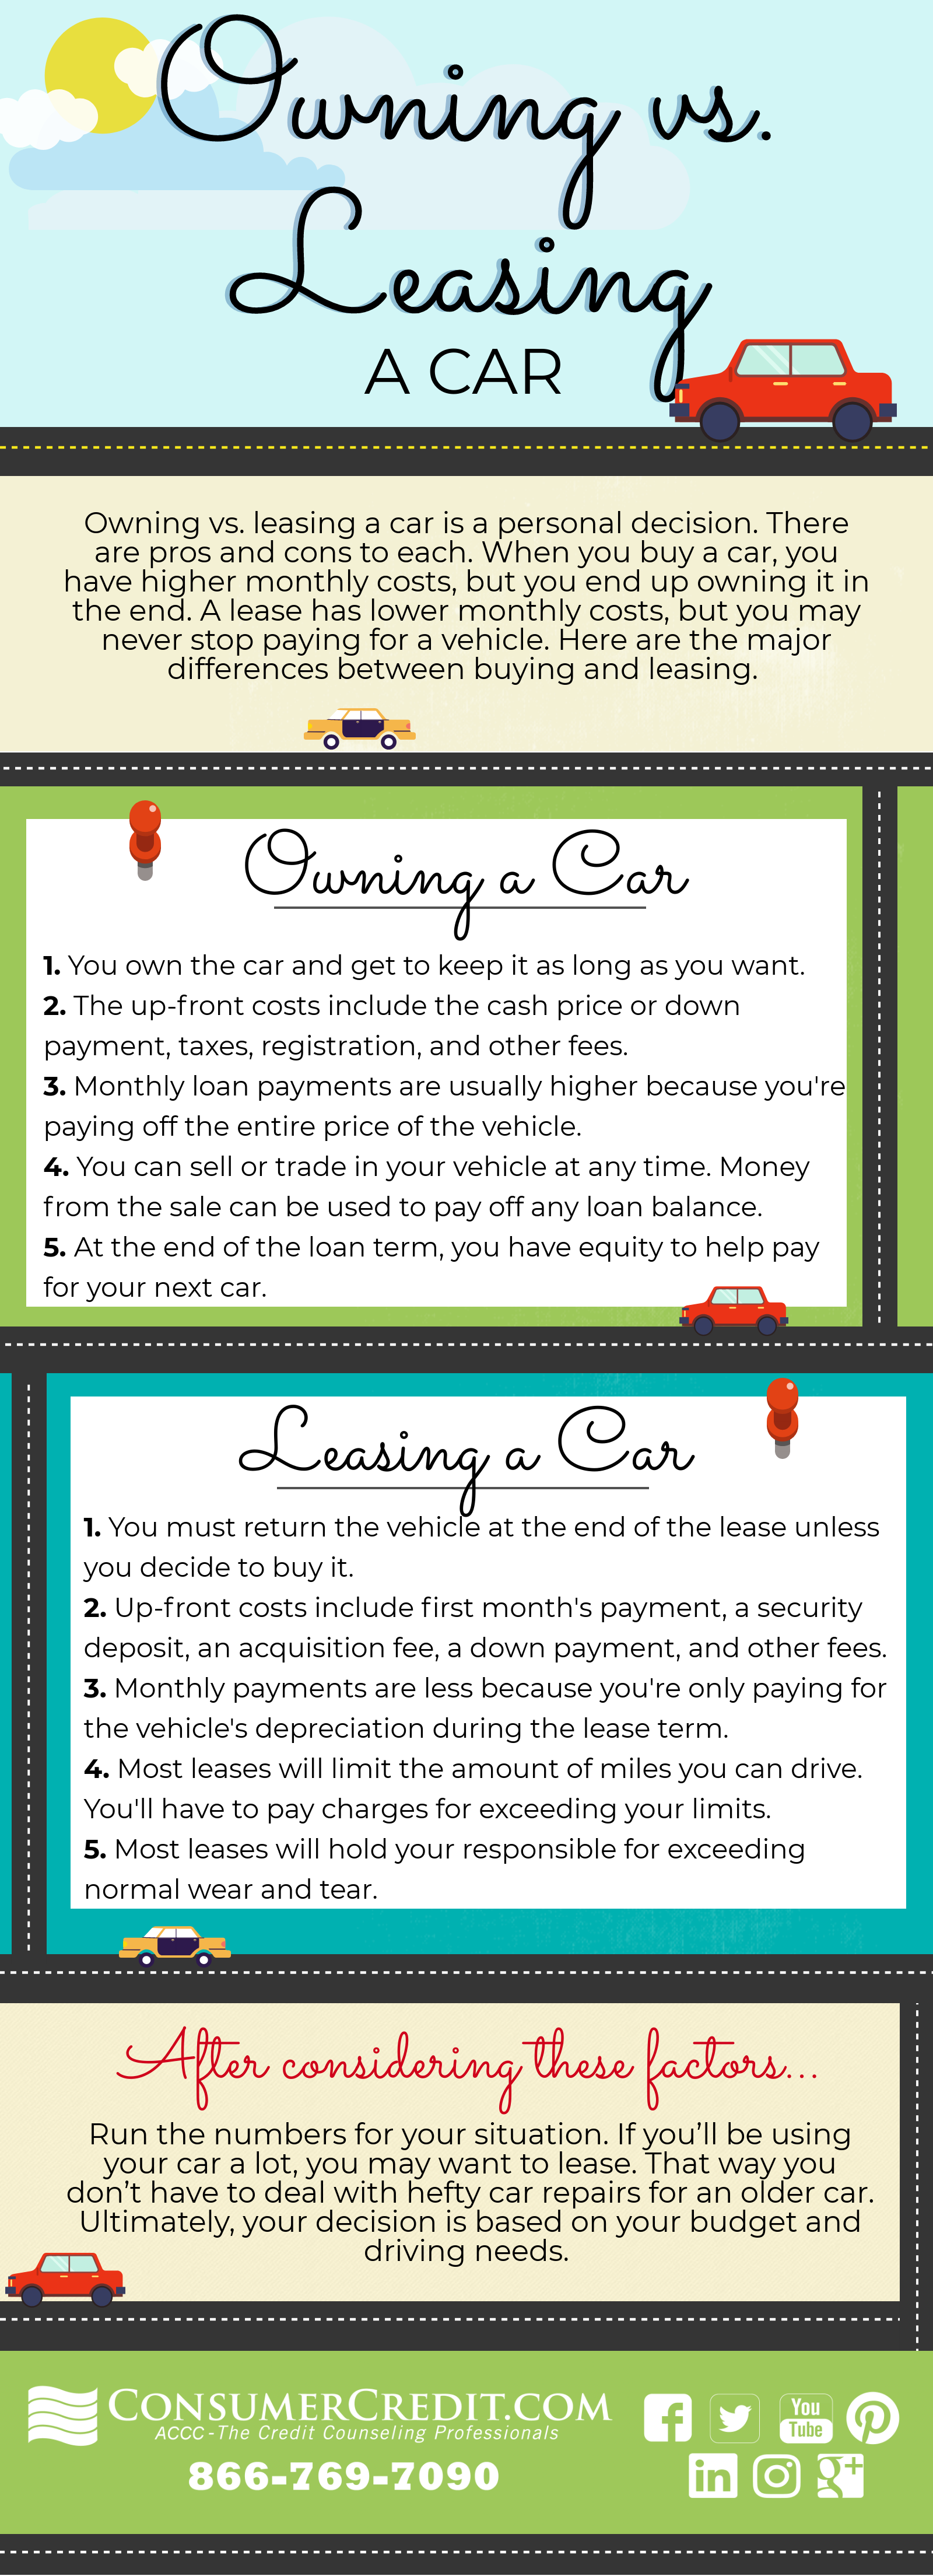 Owning vs Leasing a Car